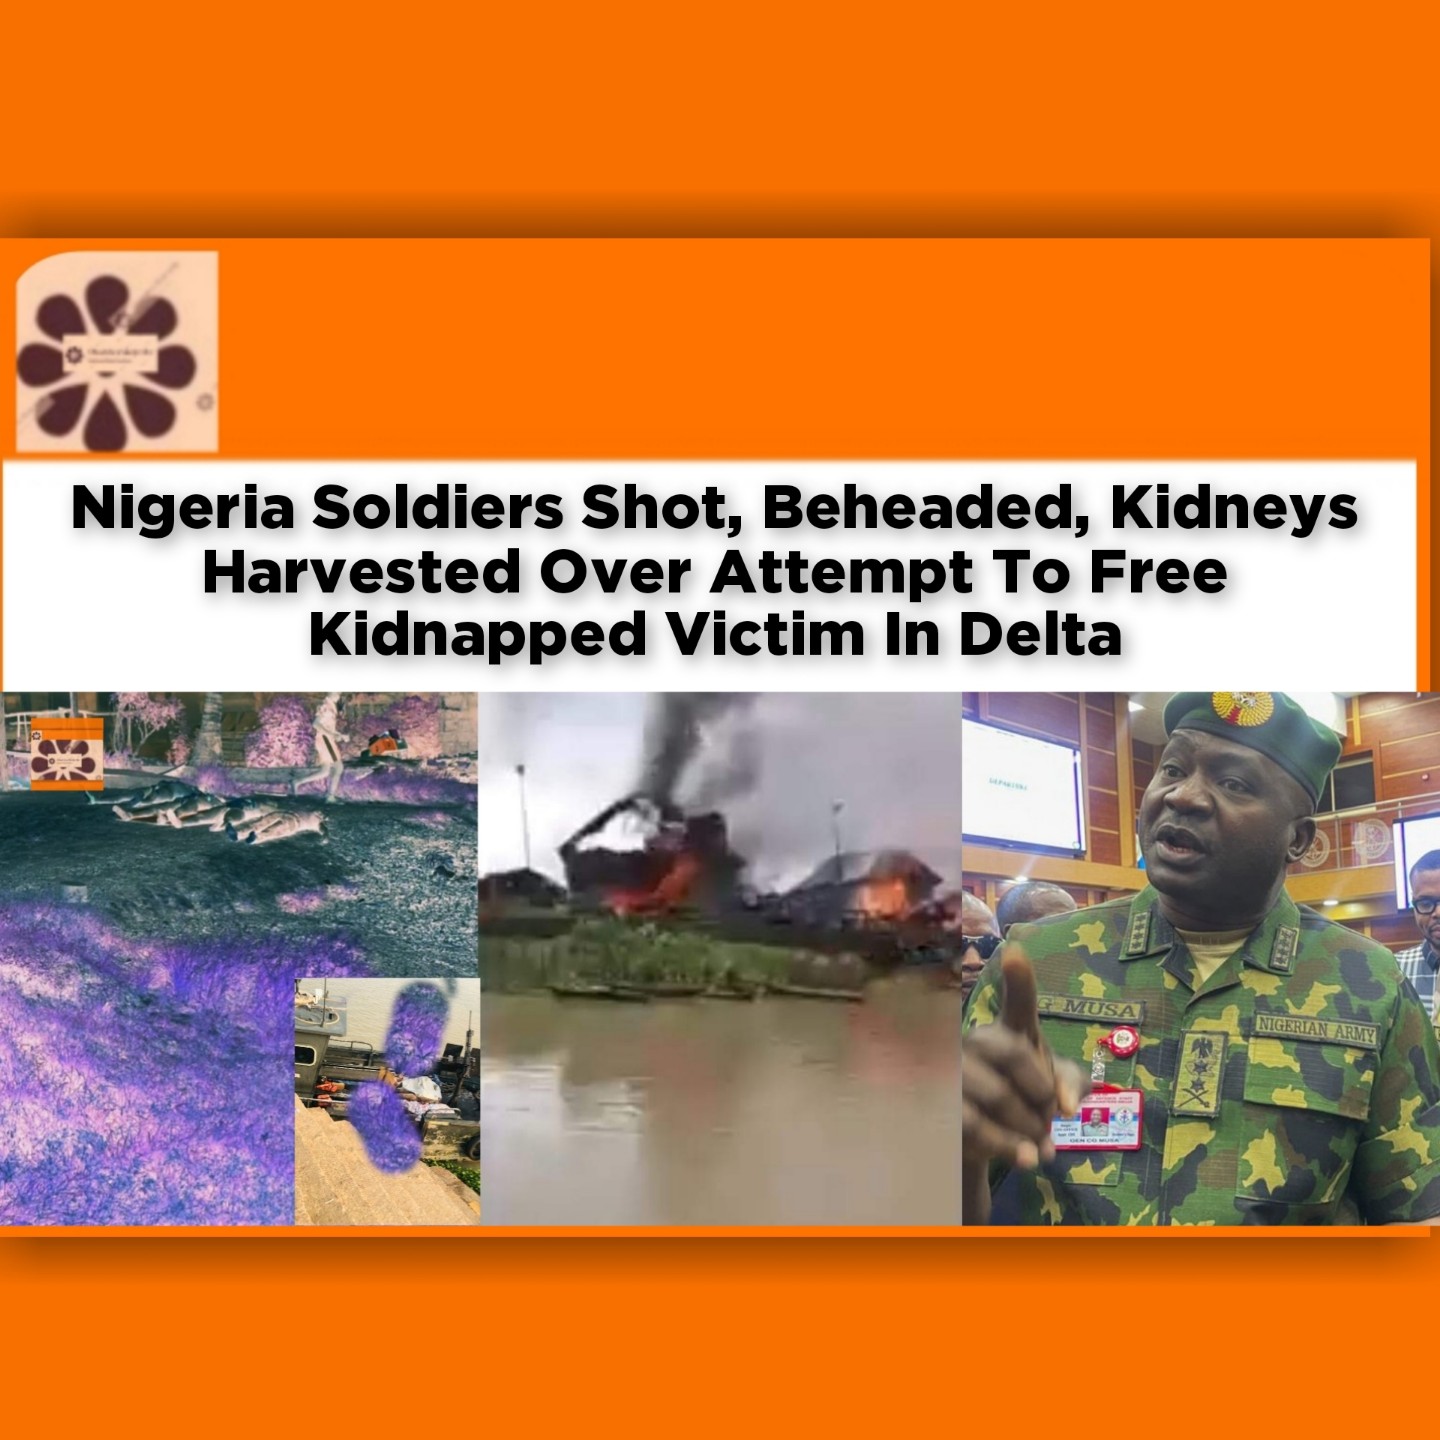 Nigeria Soldiers Shot, Beheaded, Kidneys Harvested Over Attempt To Free Kidnapped Victim In Delta ~ OsazuwaAkonedo #CommunalCrisis #Delta #Nigeria #Okoloba #Okuama #soldiers